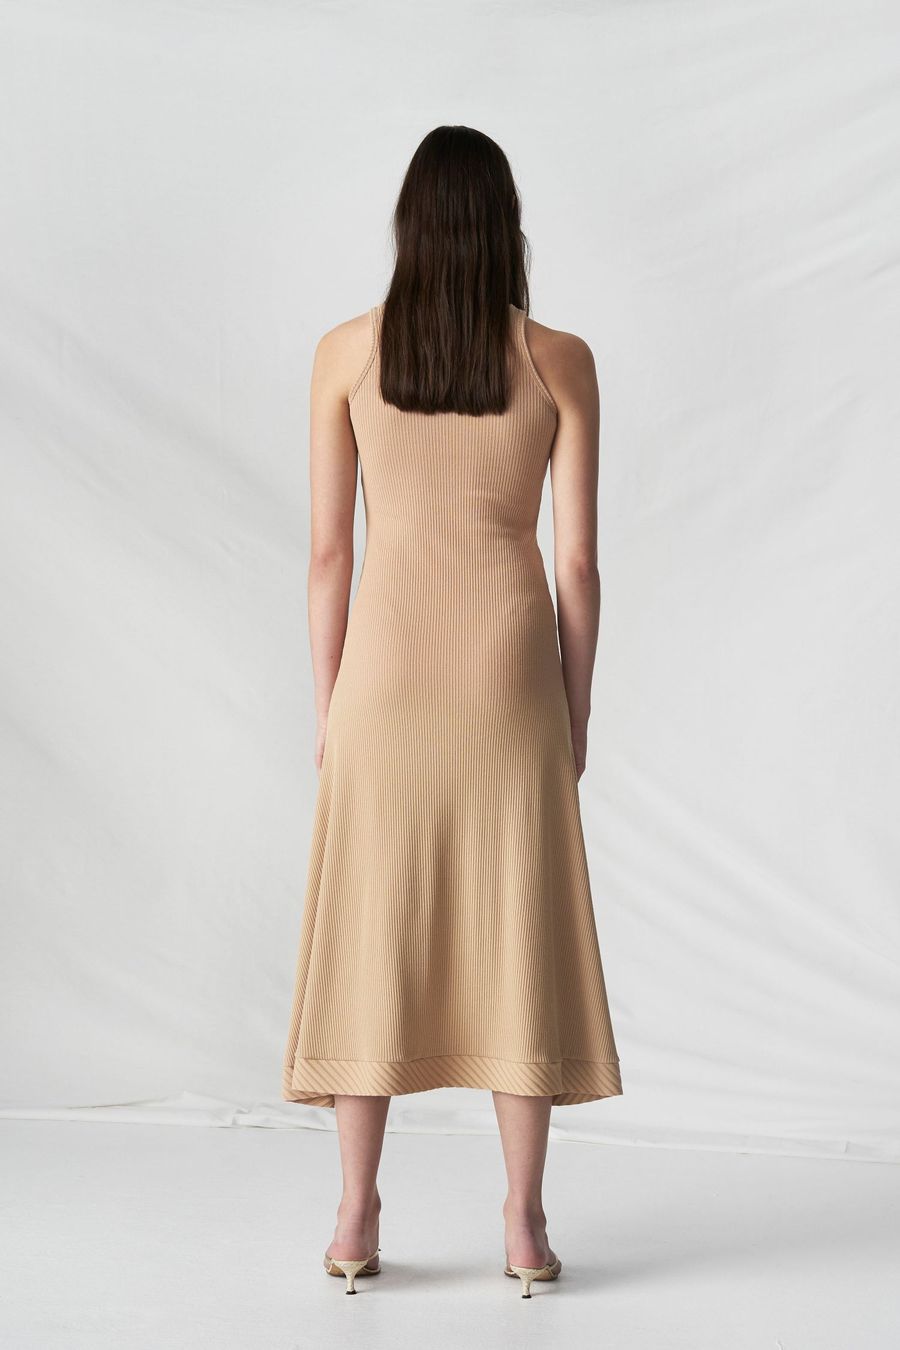 COURAGE AND ENDURANCE DRESS - CAMEL